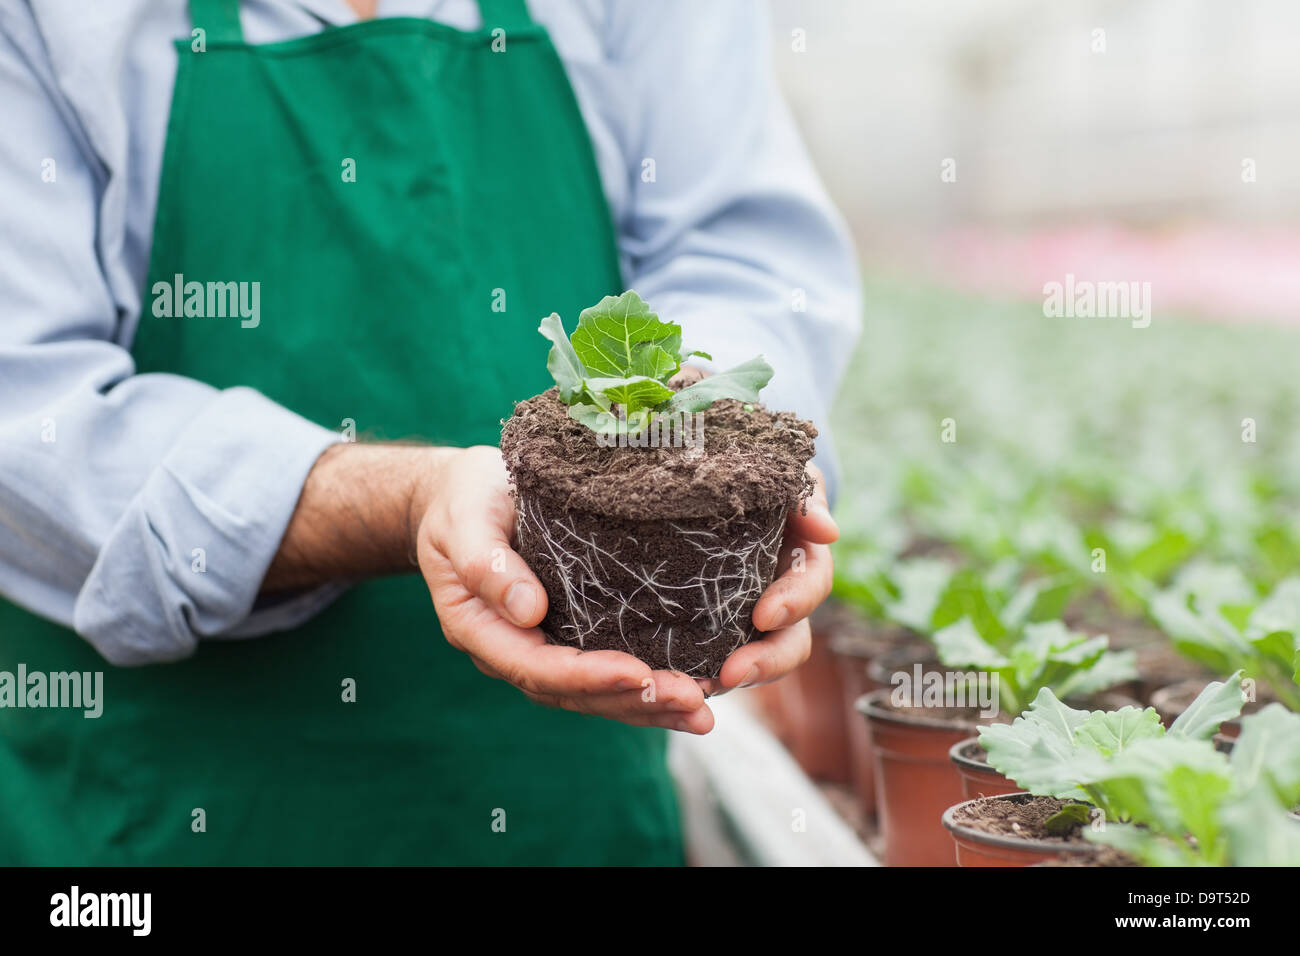 Garden center worker holding plant out of its pot Stock Photo